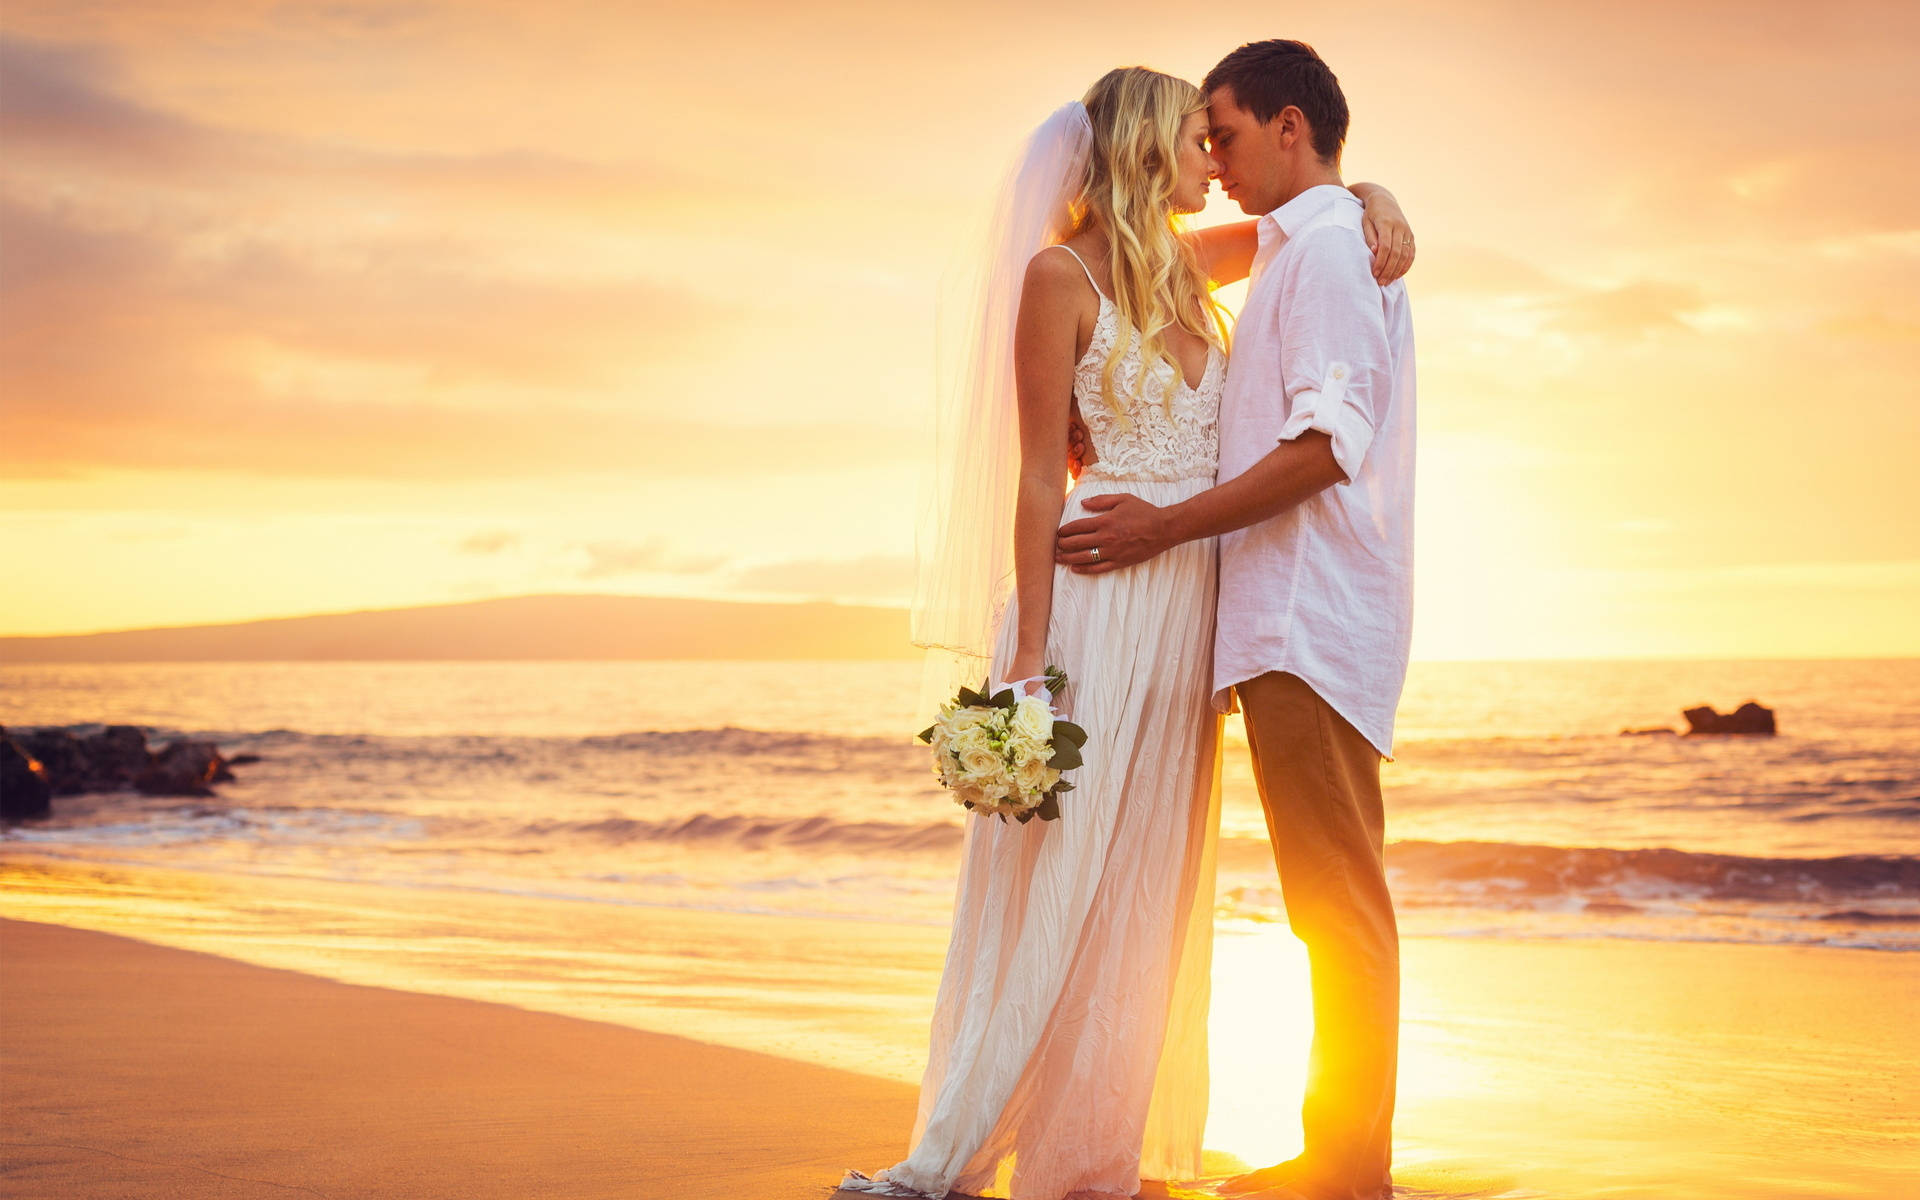 Groom With Bride In Beach Background